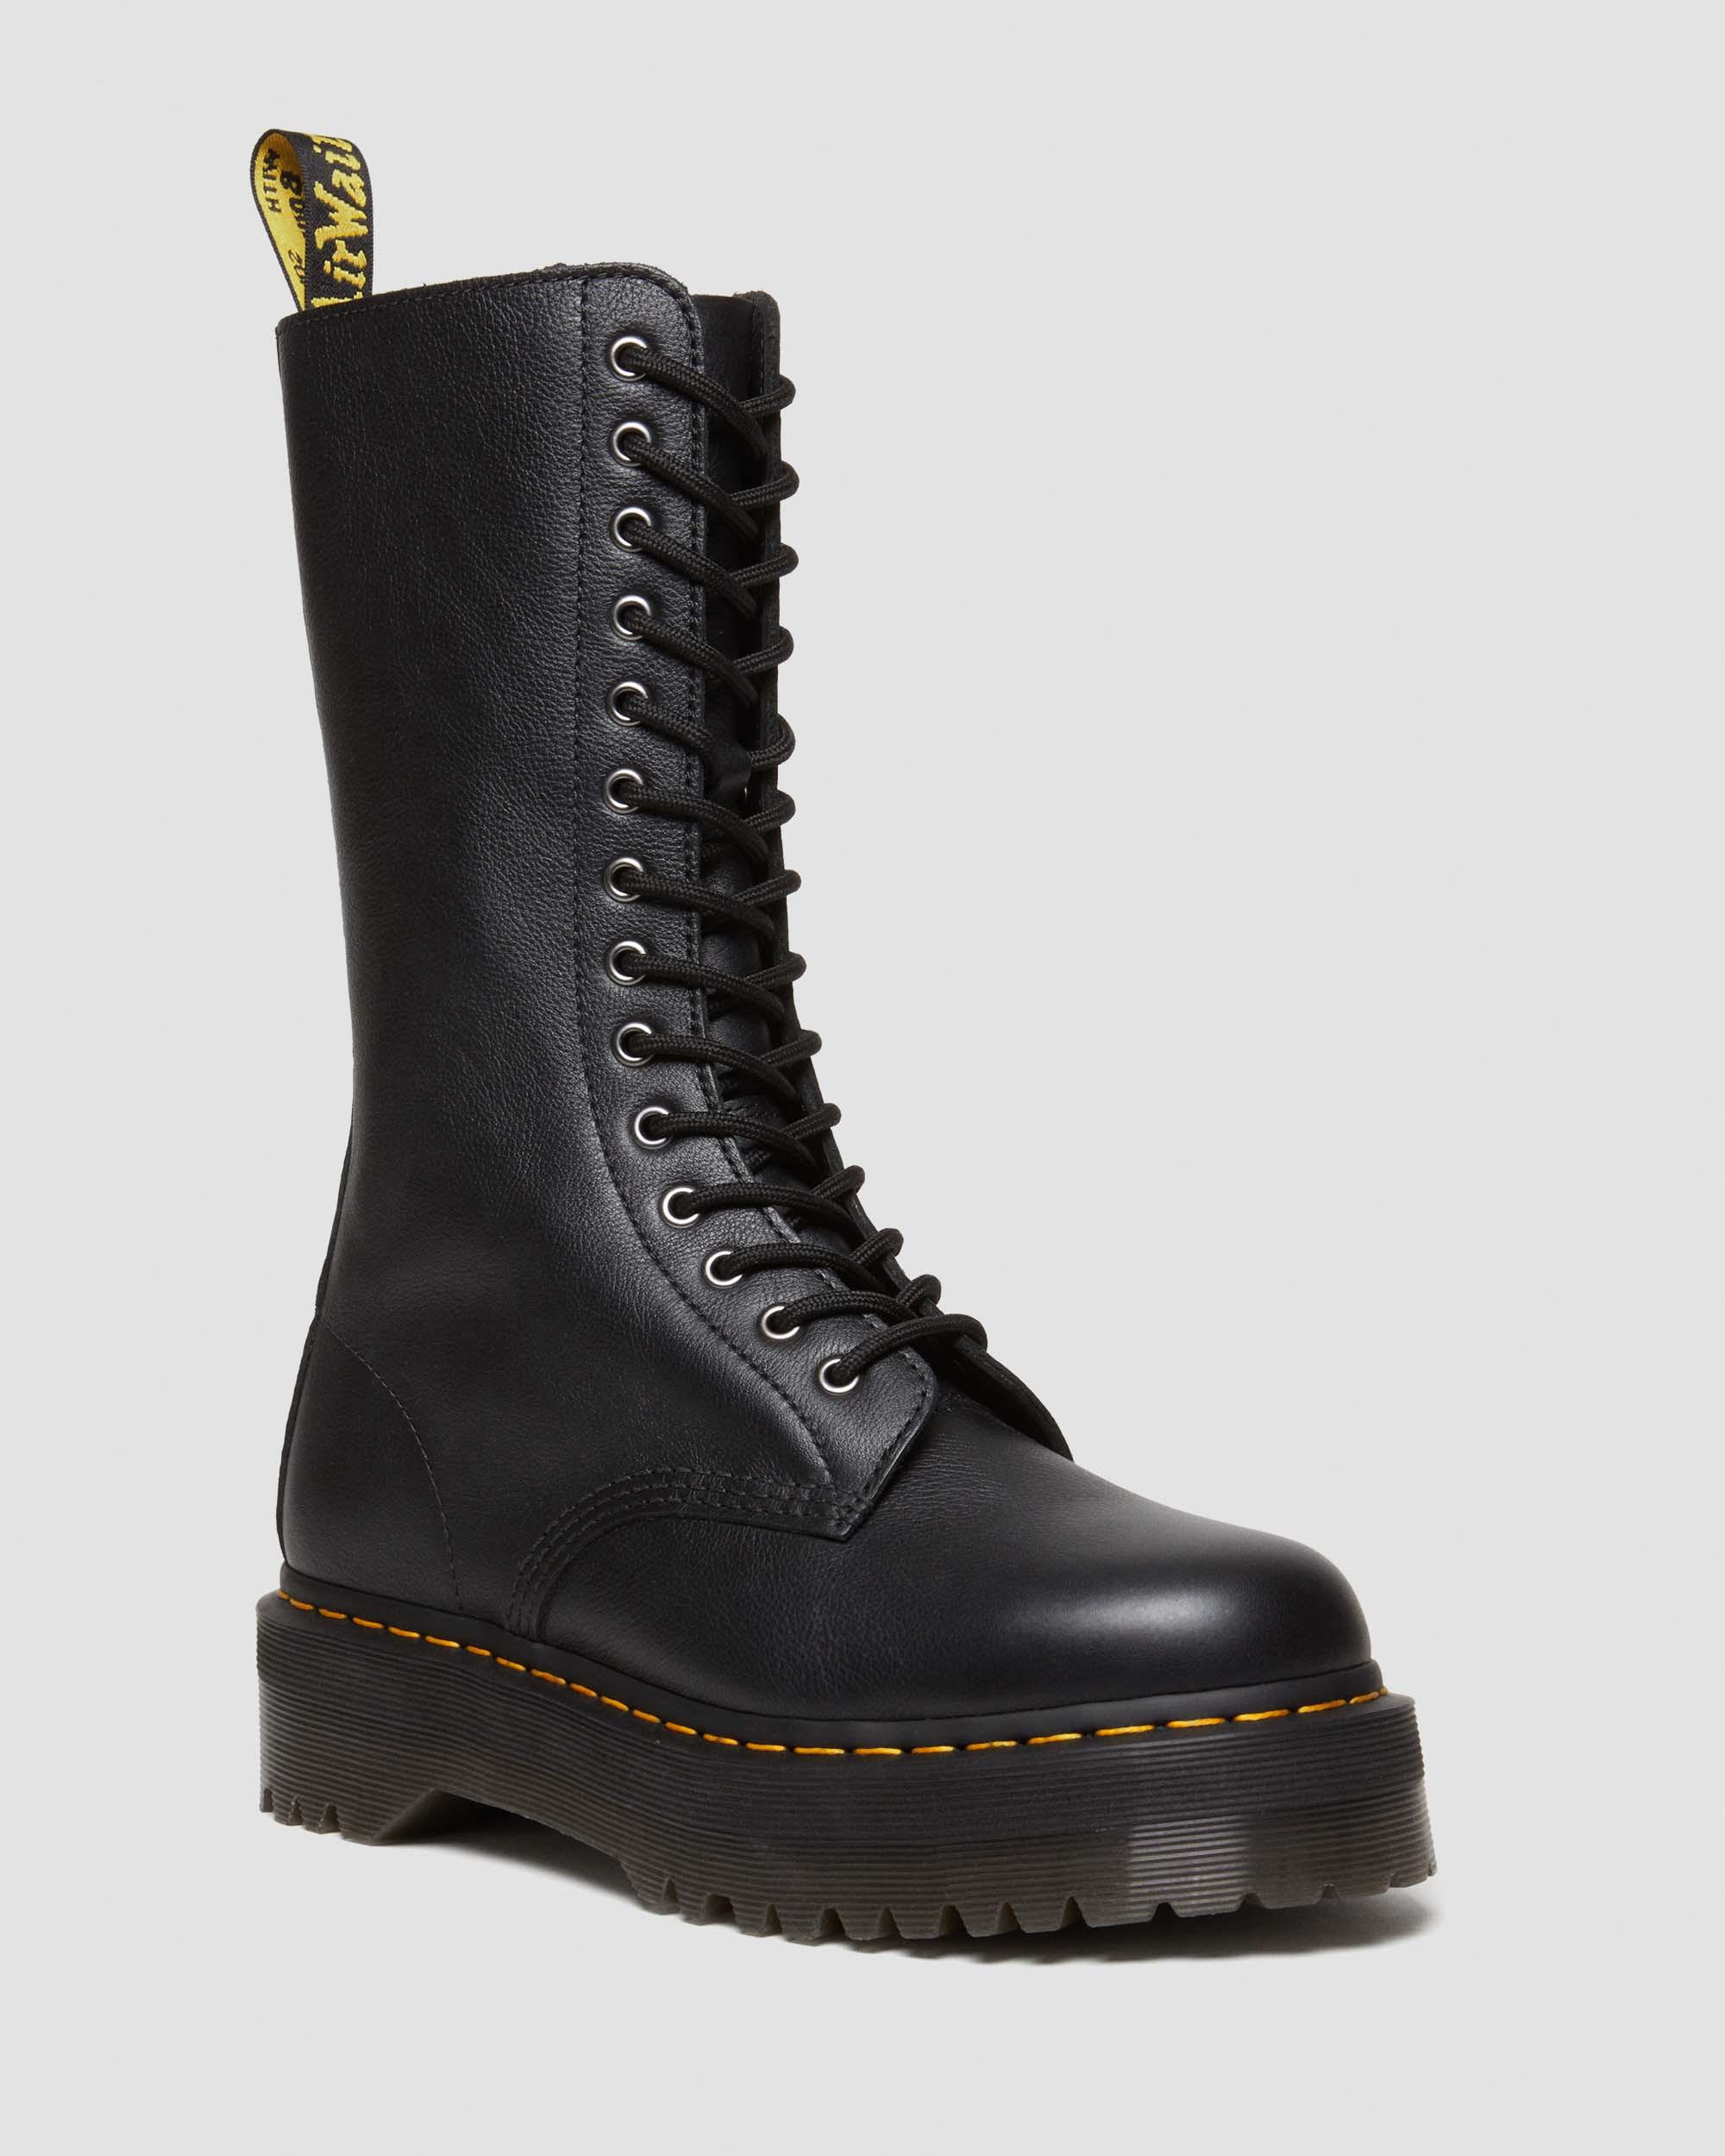 1B99 Pisa Leather Mid Calf Lace Up Boots in Black | Dr. Martens